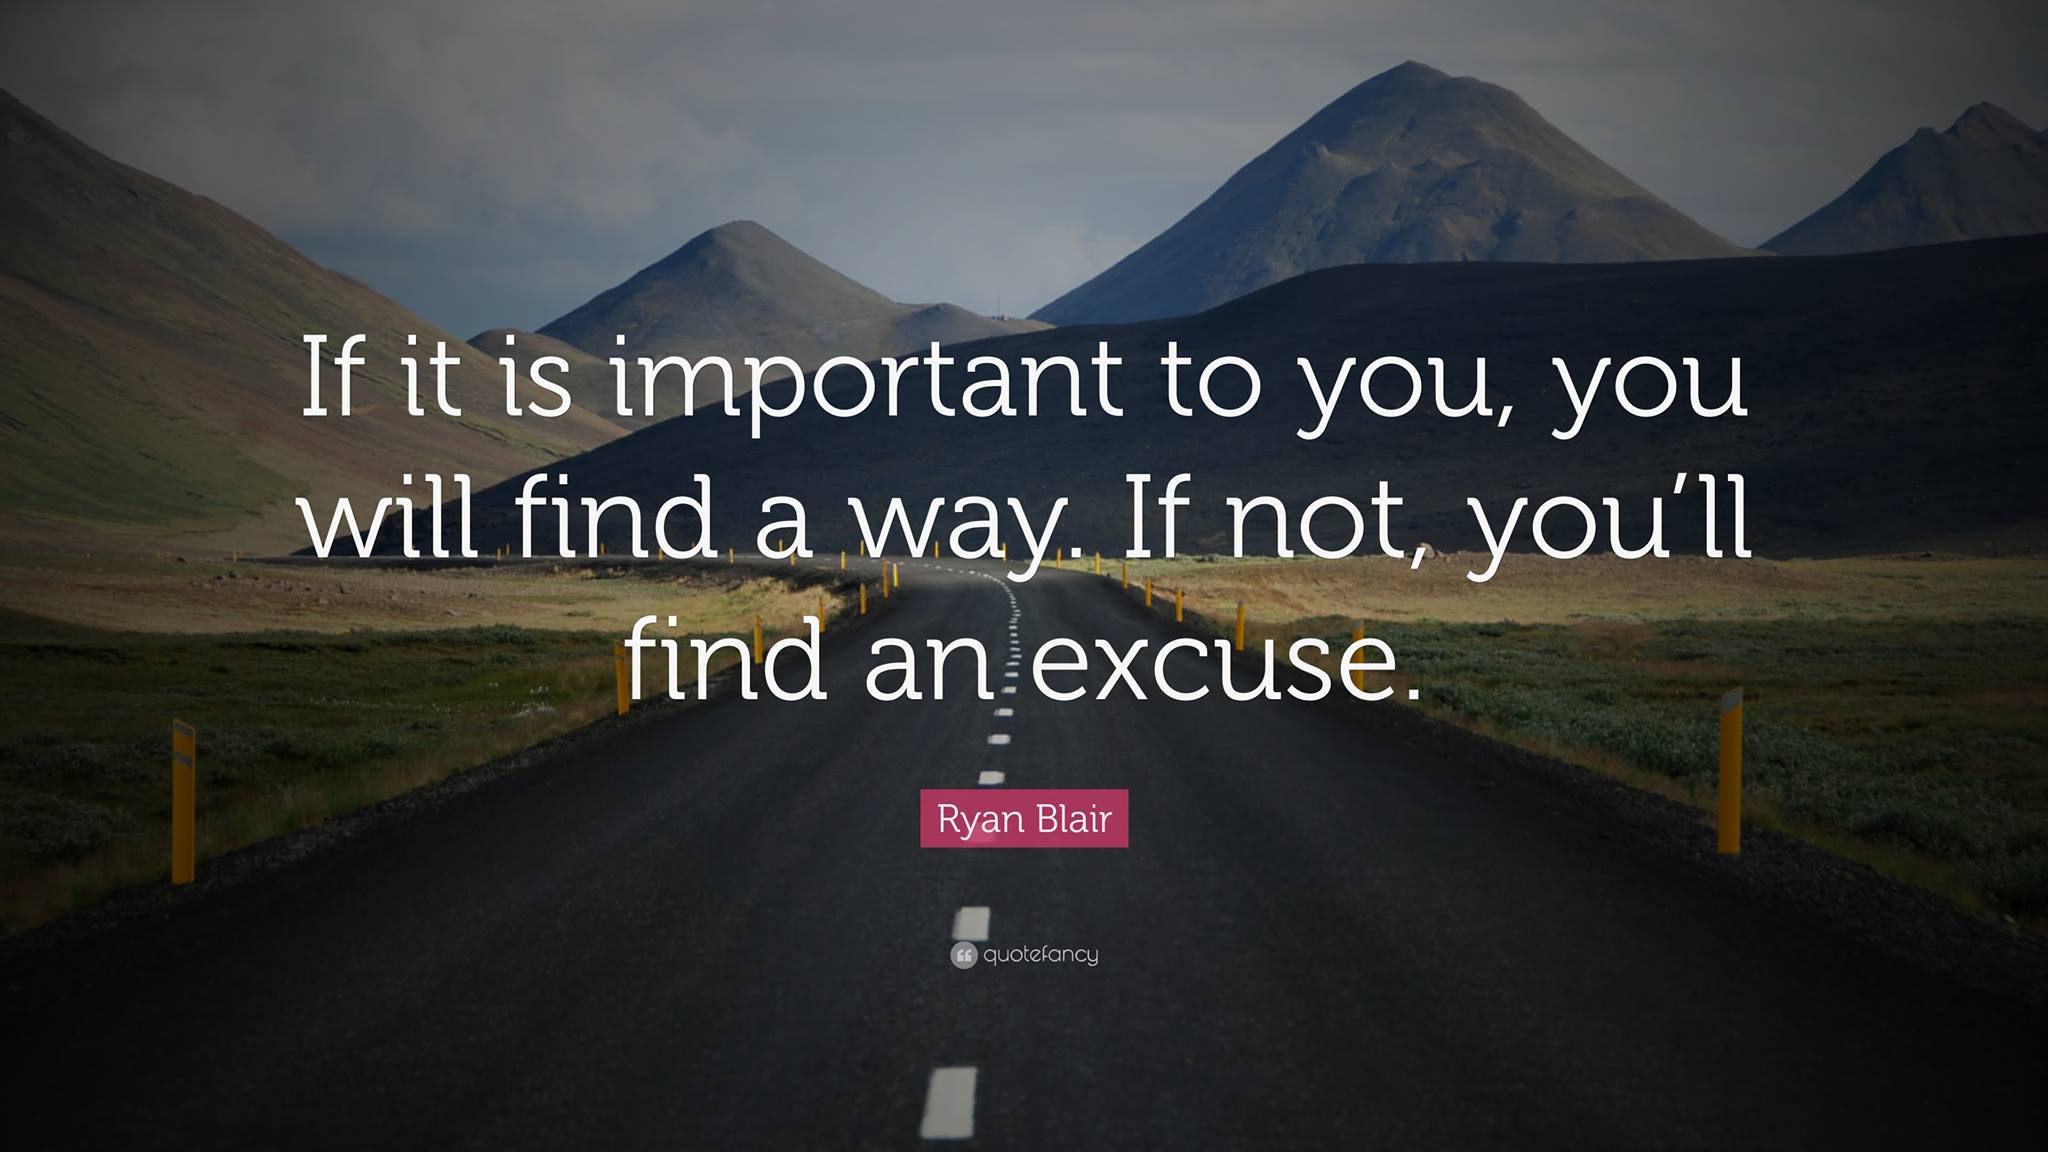 1. Make no excuses for the things that are truly important to you. 